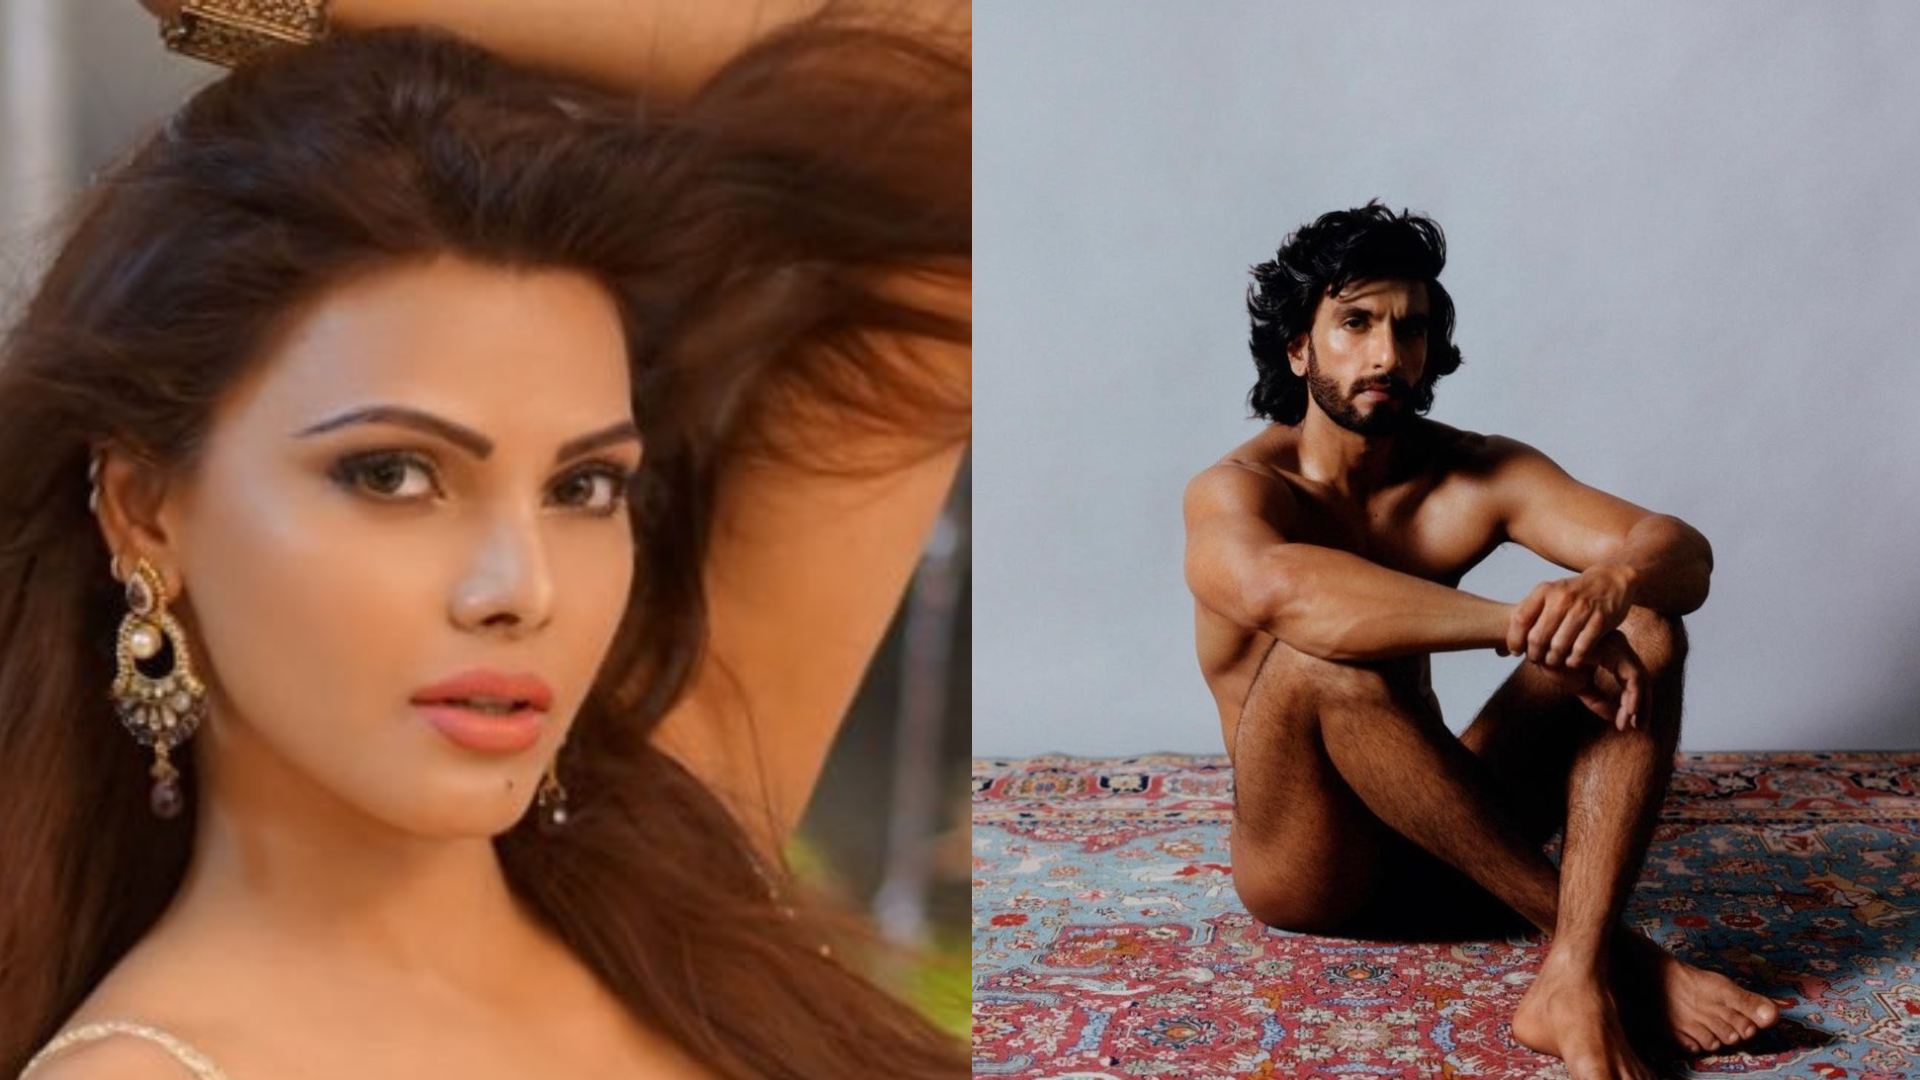 Sherlyn Chopra calls out Deepika Padukone over Ranveer Singh's nude photos,  says, 'Why the double standard?'